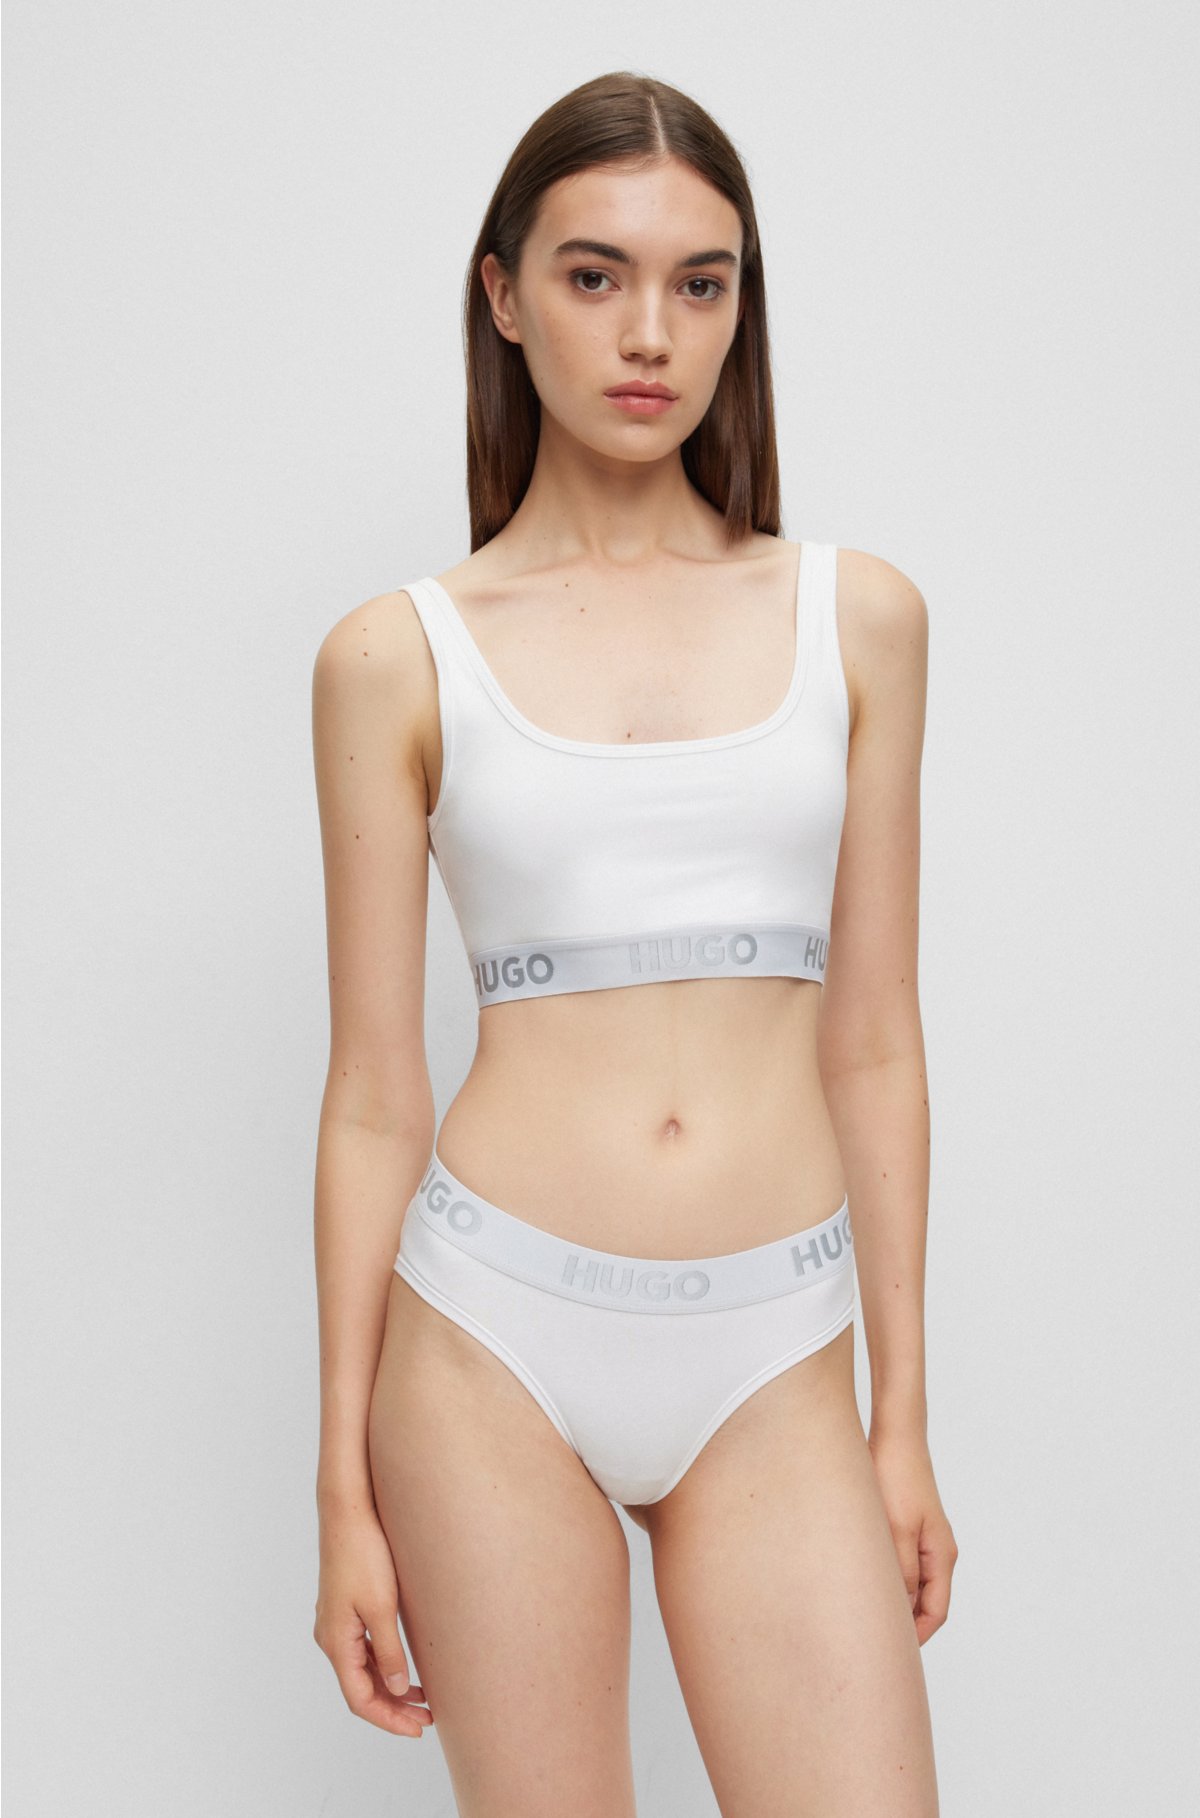 Women's Bralette with logo band